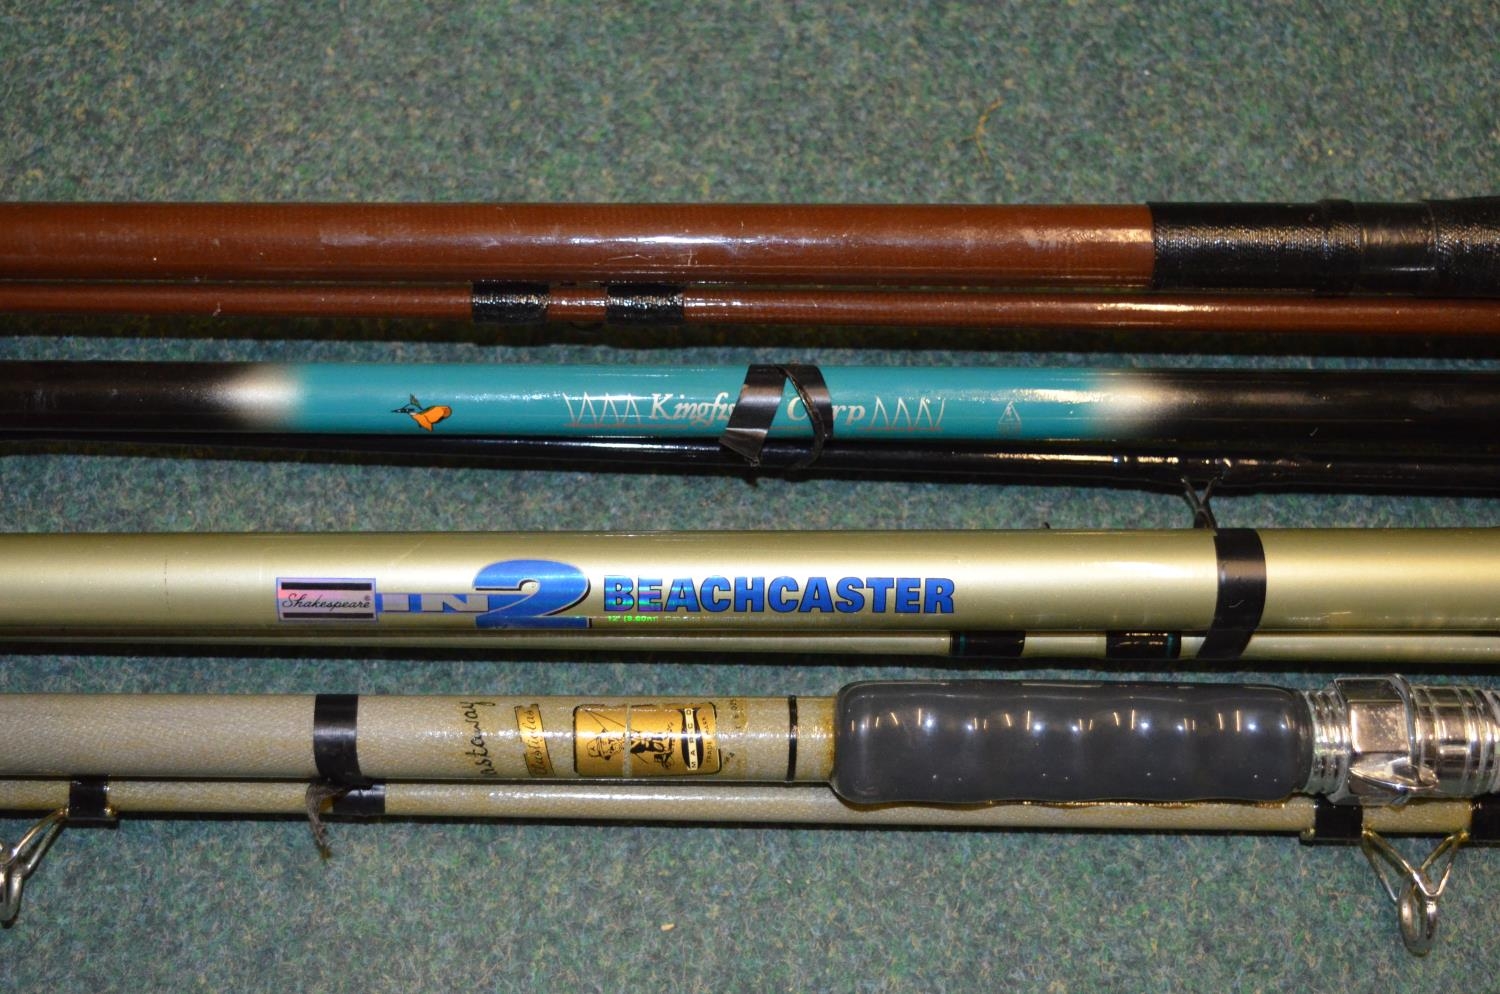 4 carbon fibre 2 piece fishing rods - modern Shakespeare 12ft "In2 Beachcaster", vintage "Castaway" - Image 6 of 7